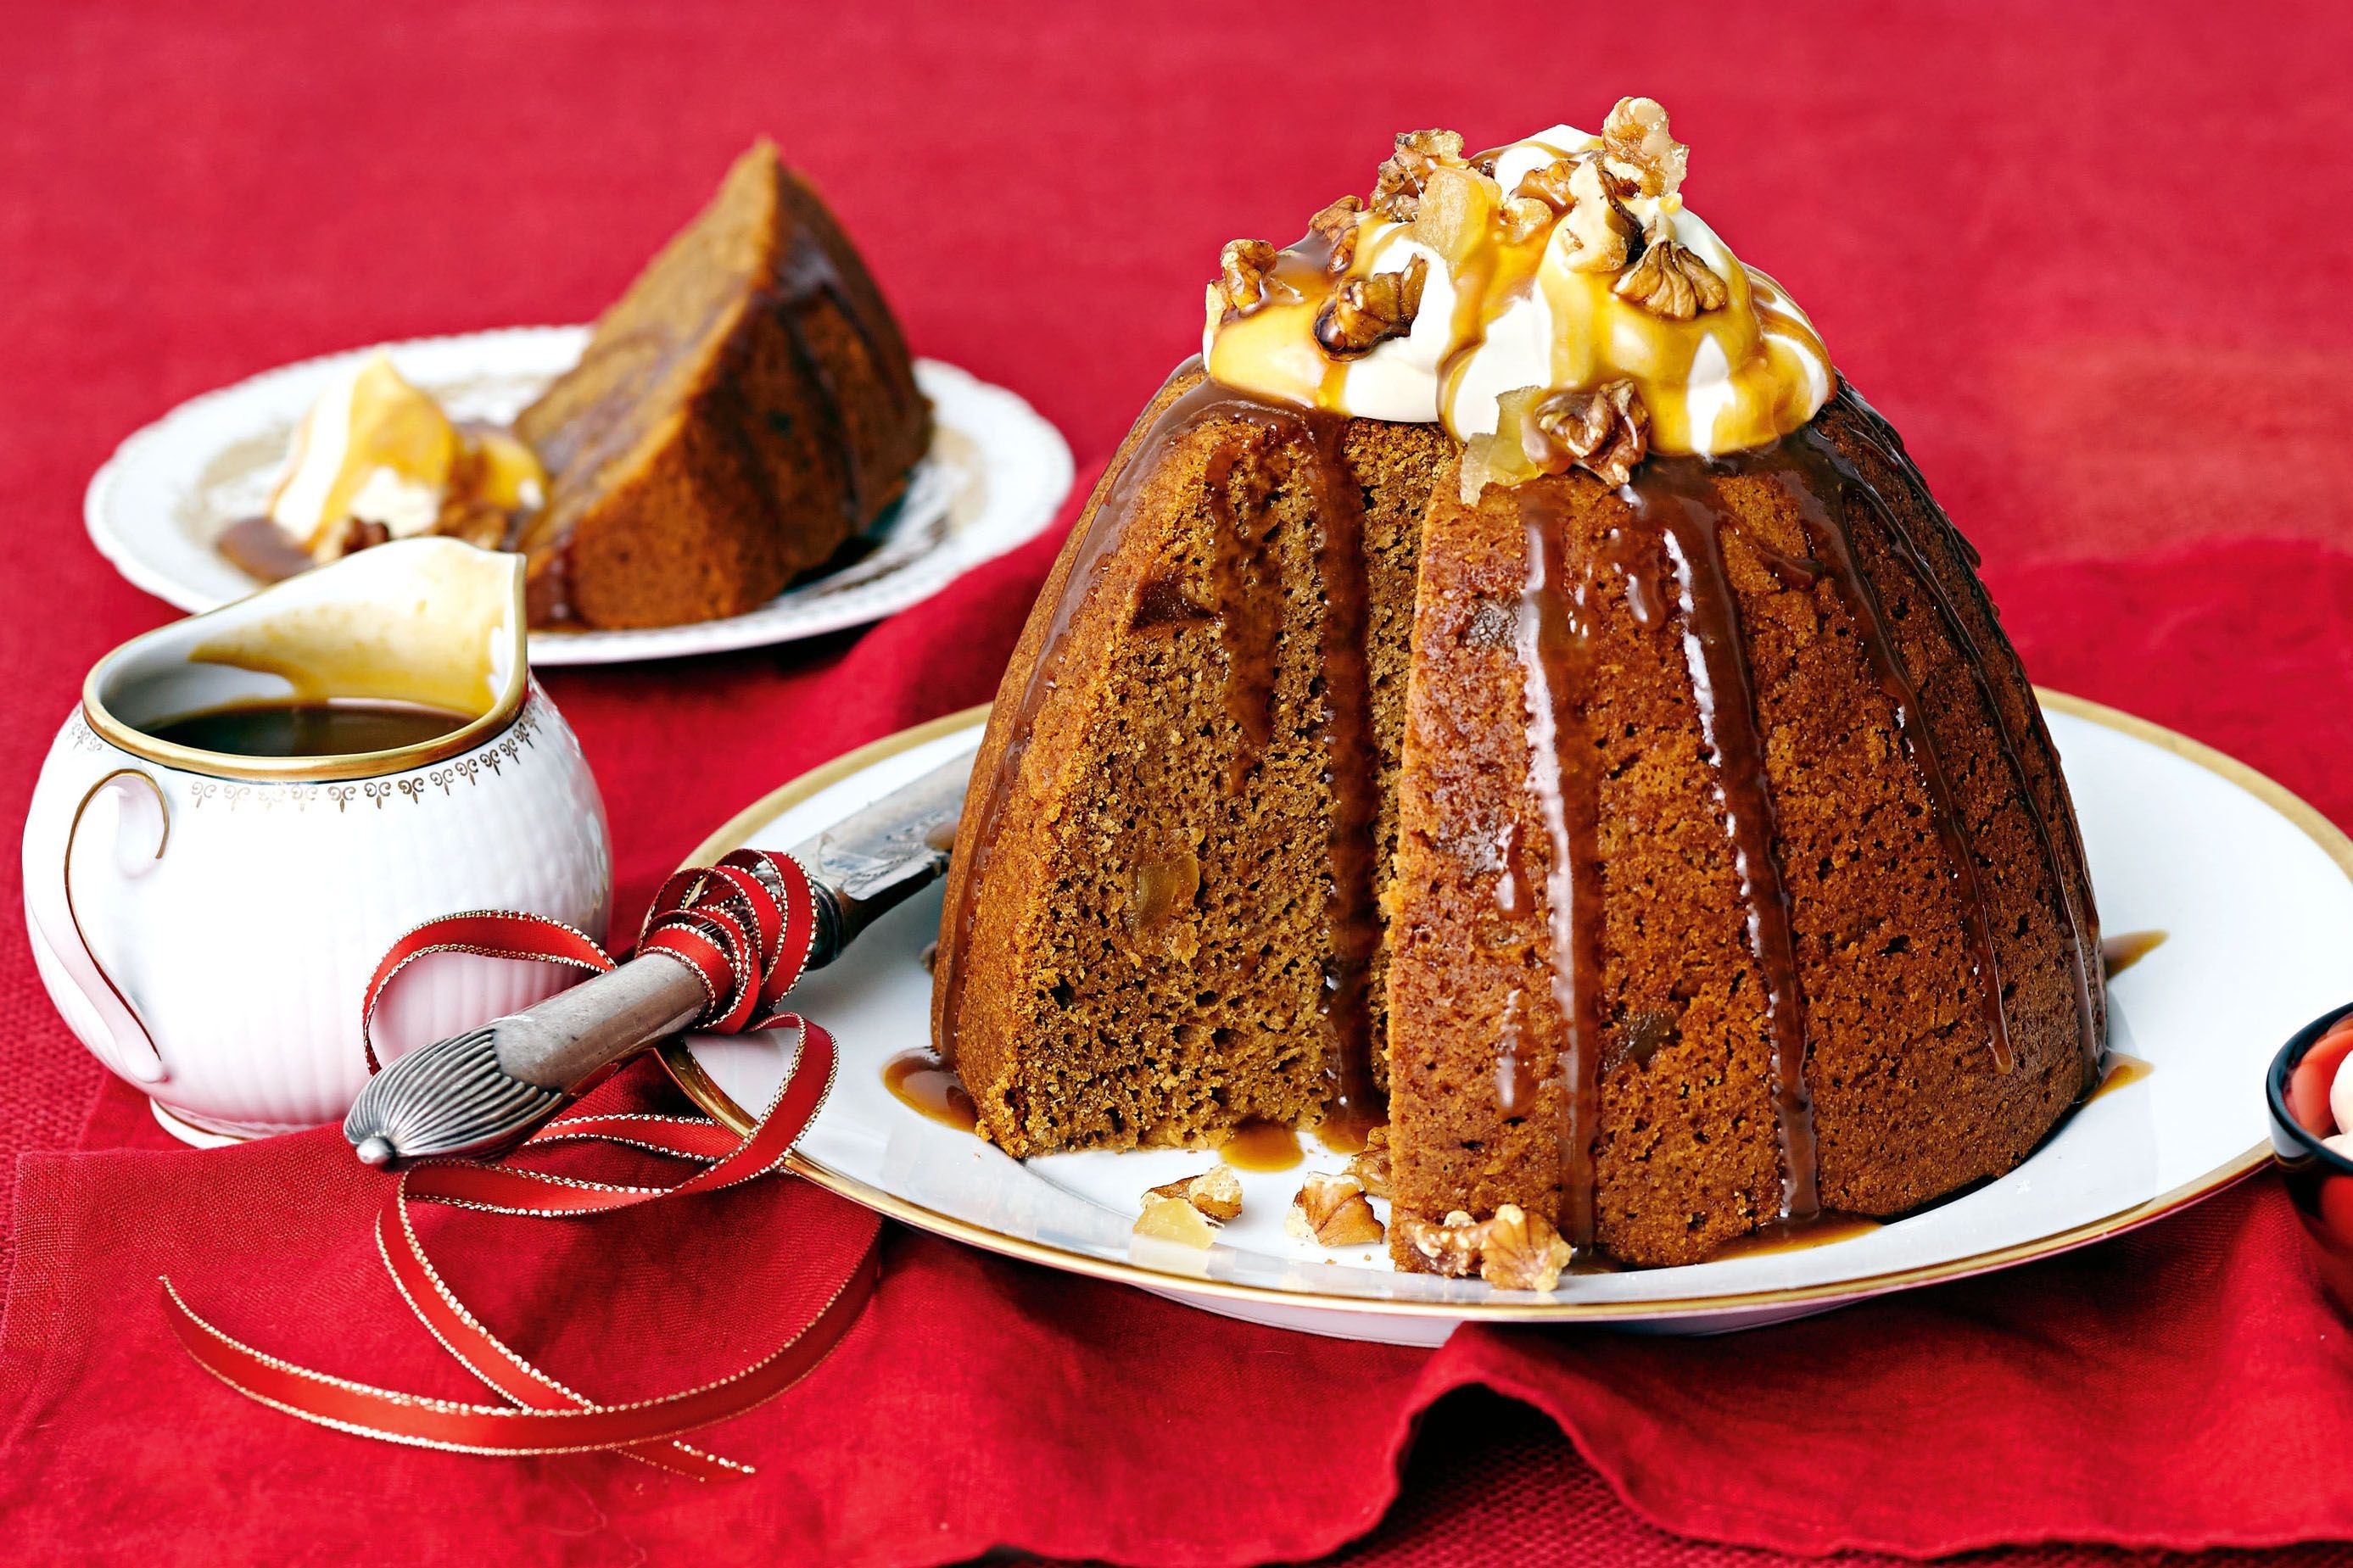 Gingerbread Pudding